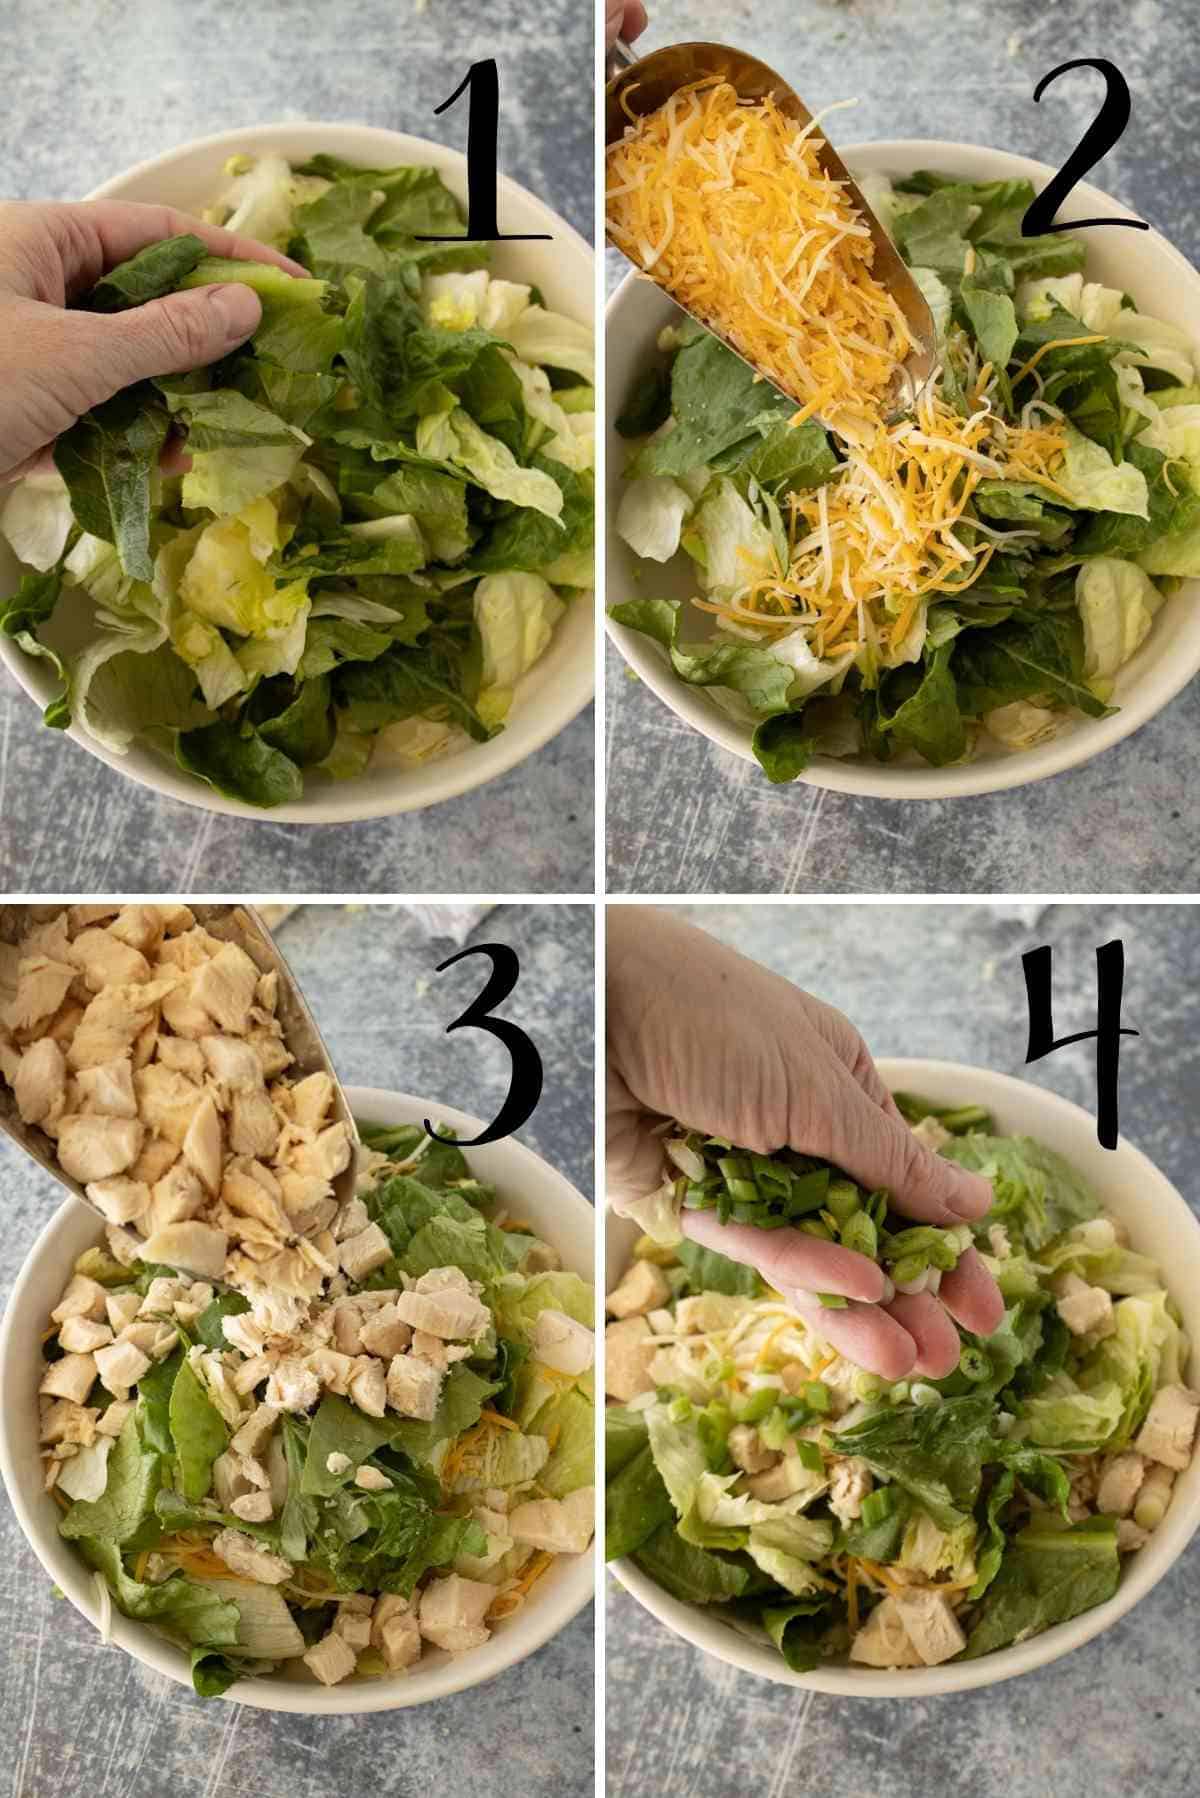 Add lettuces, cheese, chicken and green onions to a bowl.